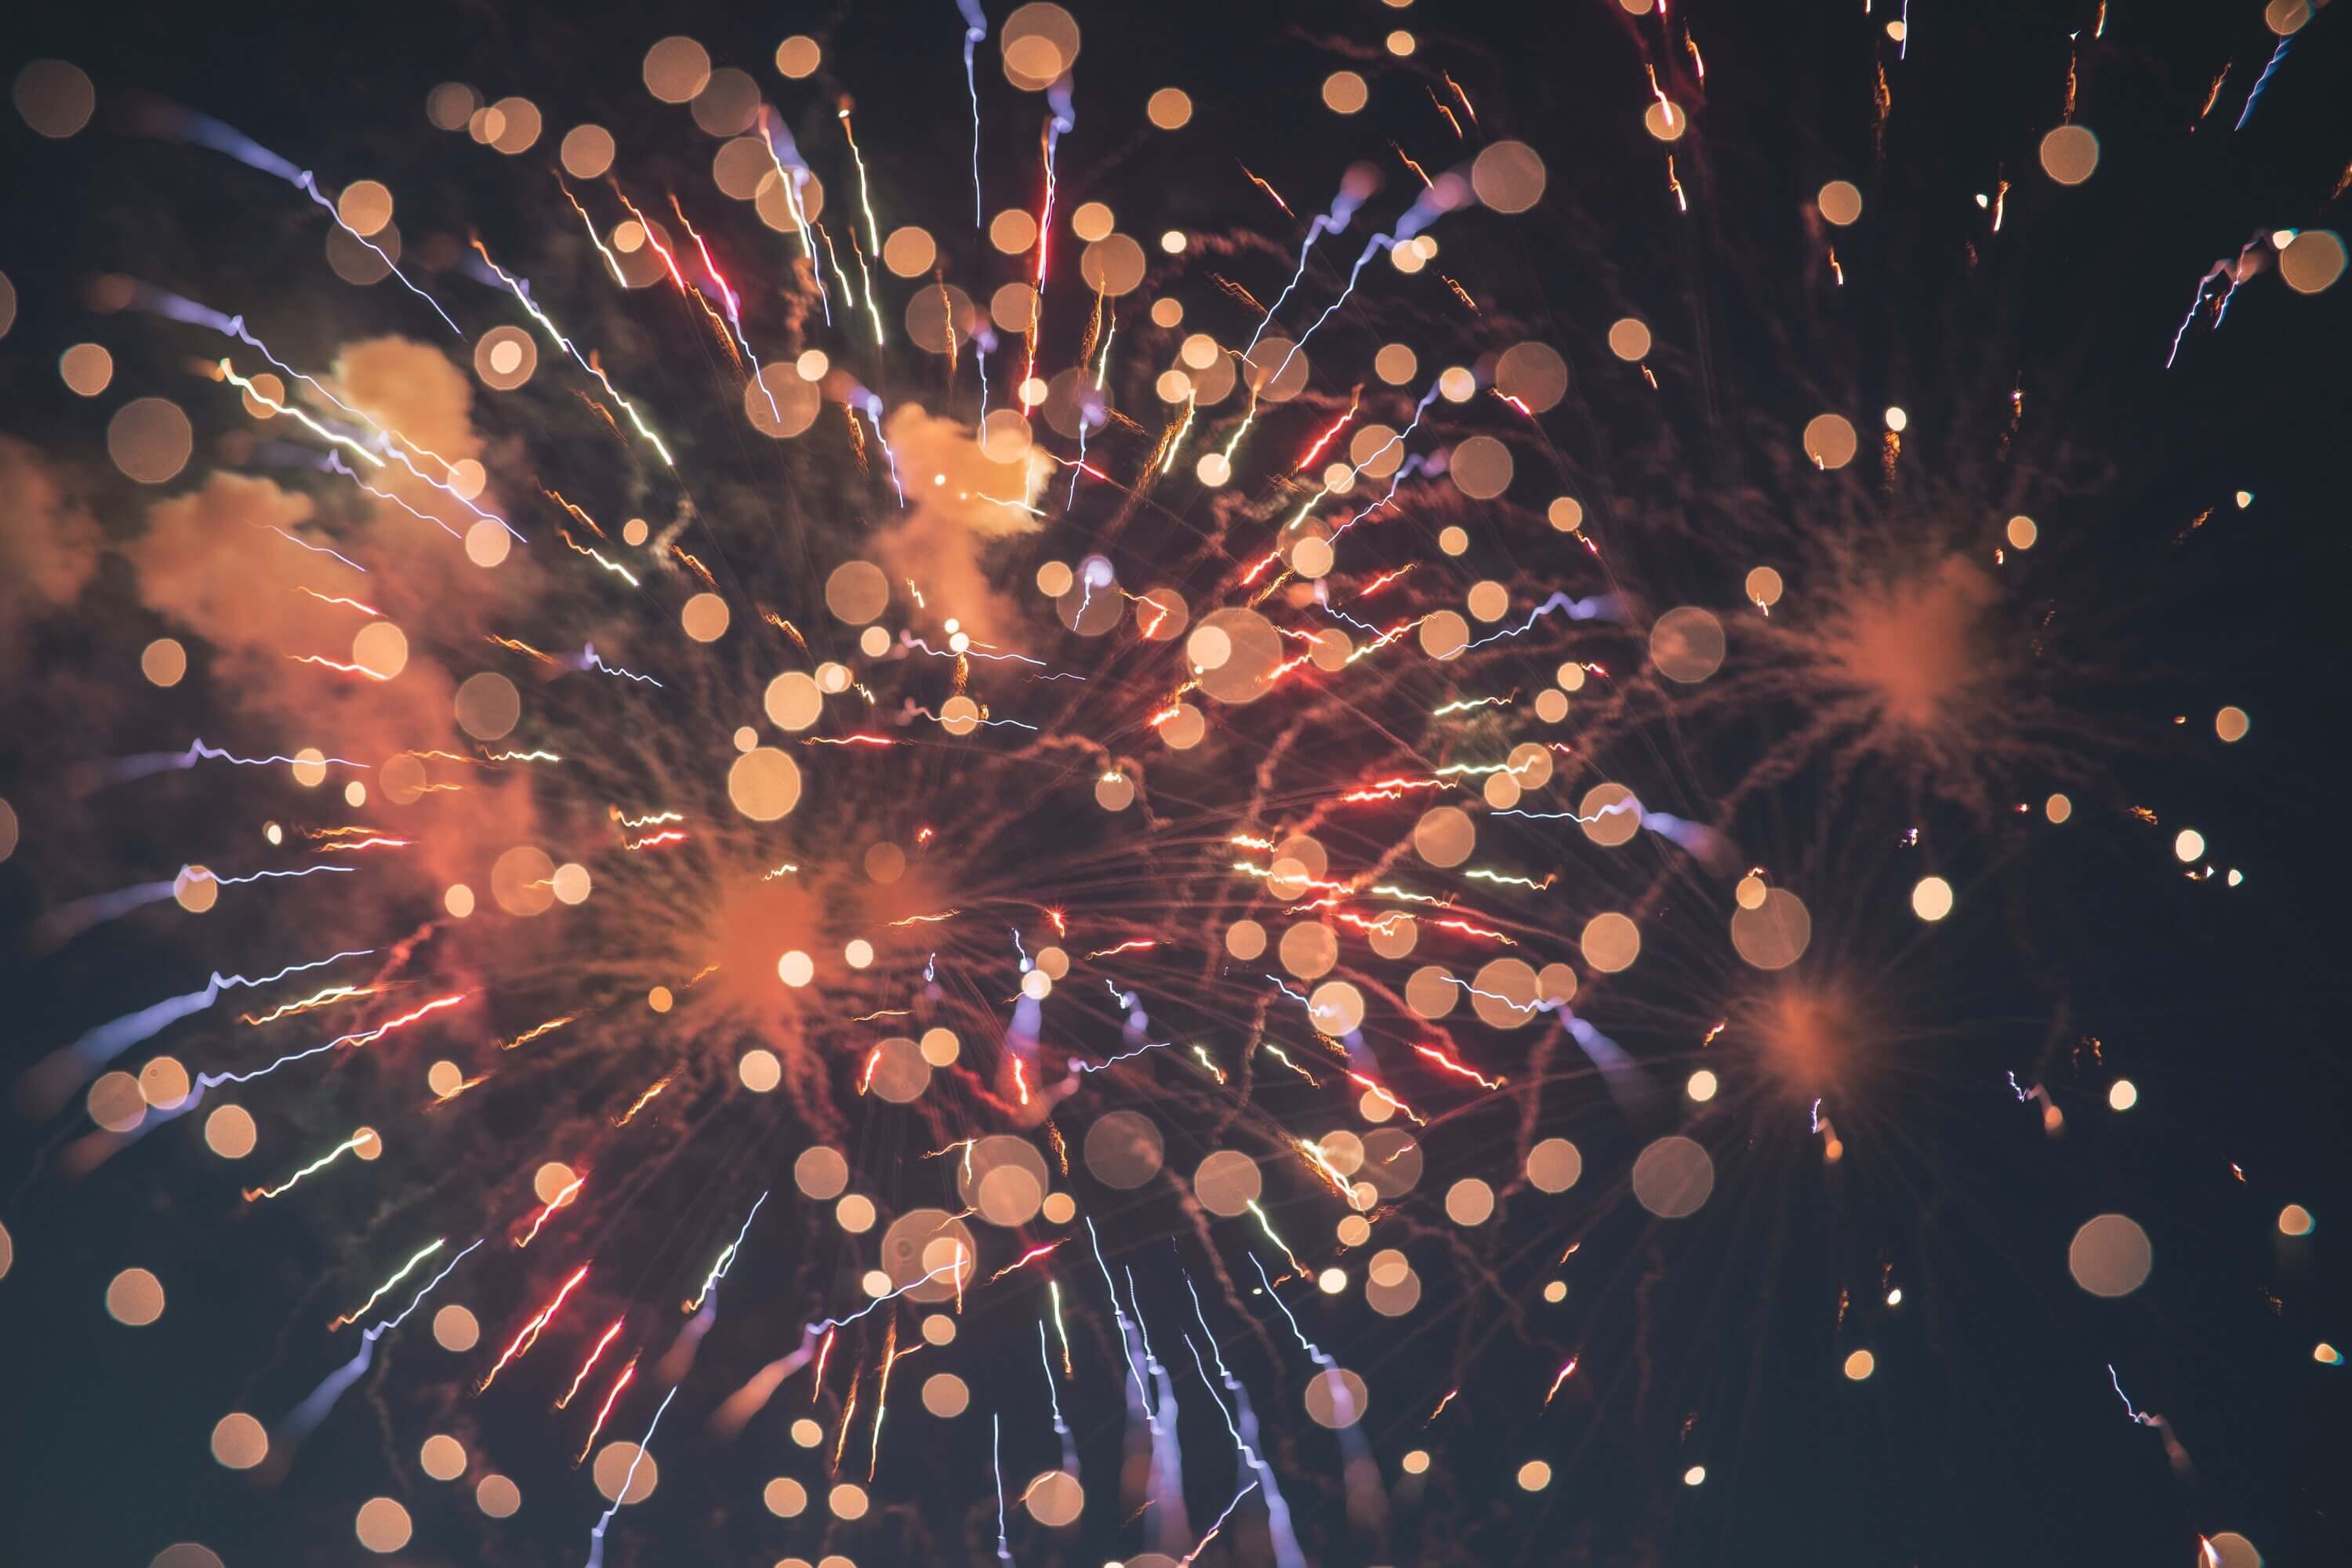 How Fireworks Produce the Colourful Light Shows We All Love